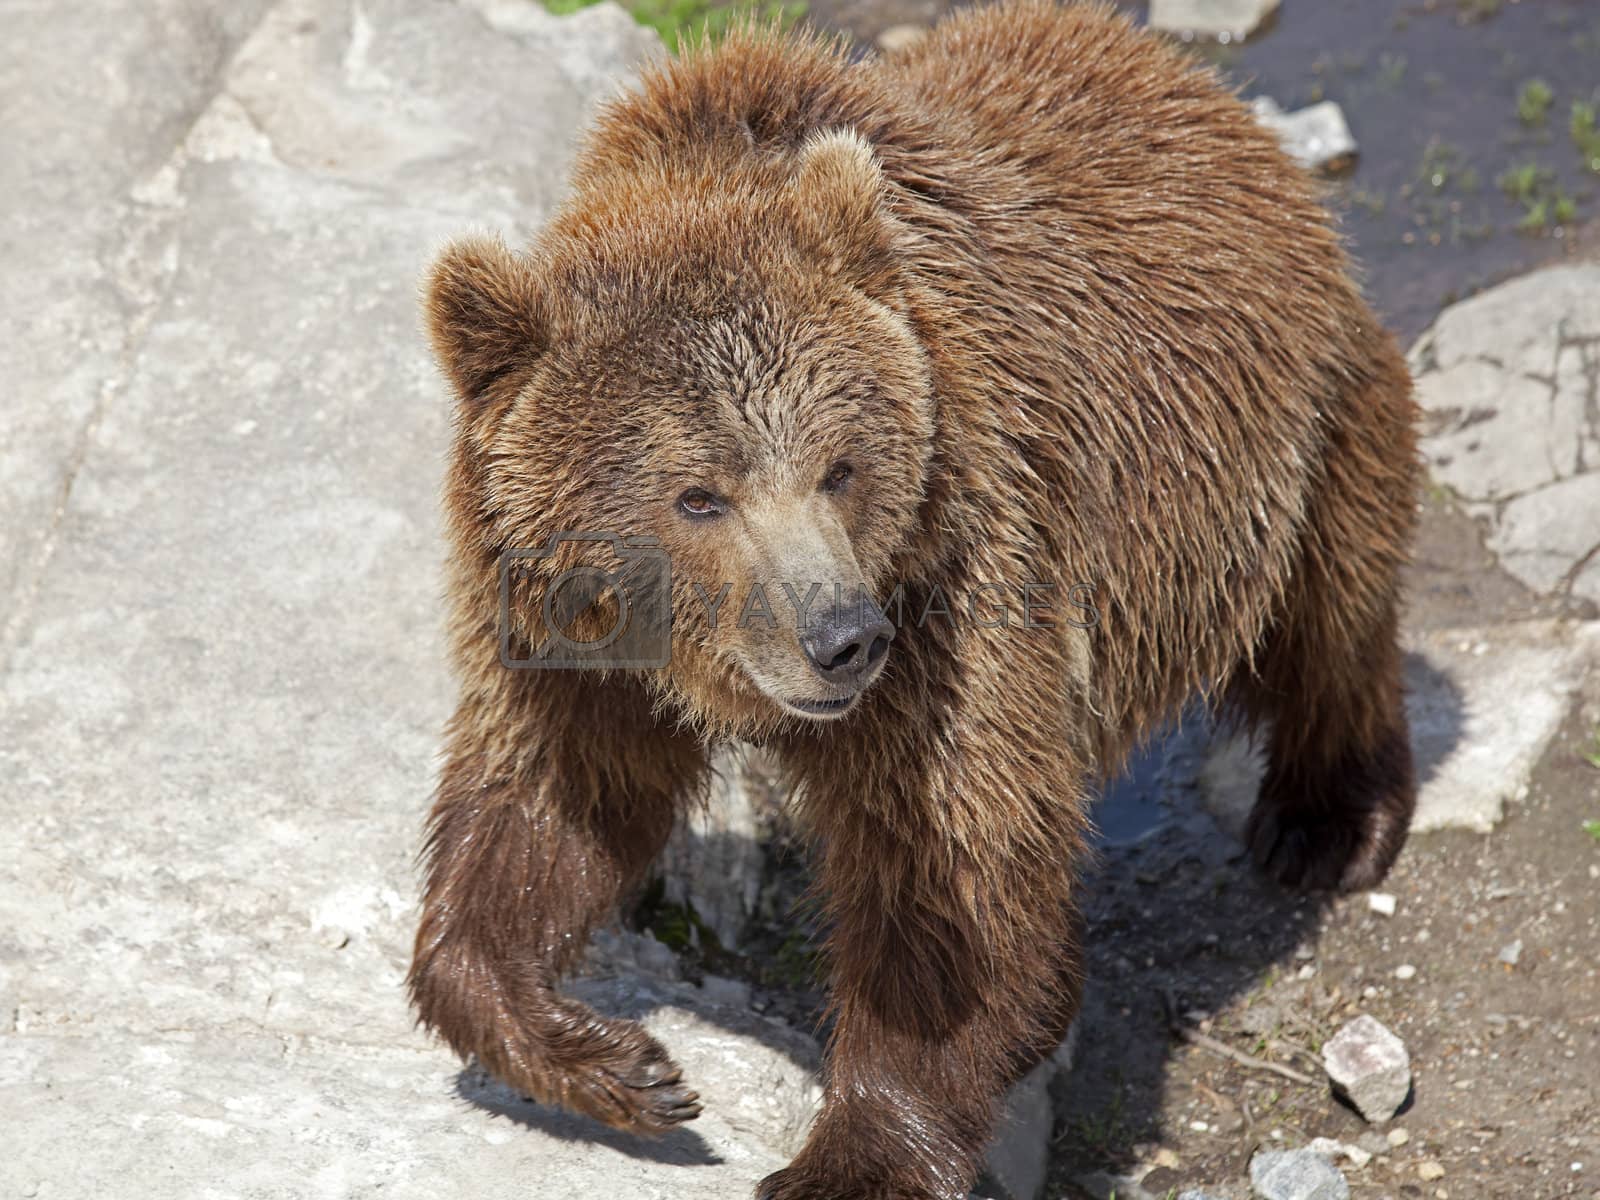 Royalty free image of Brown bear by kjorgen